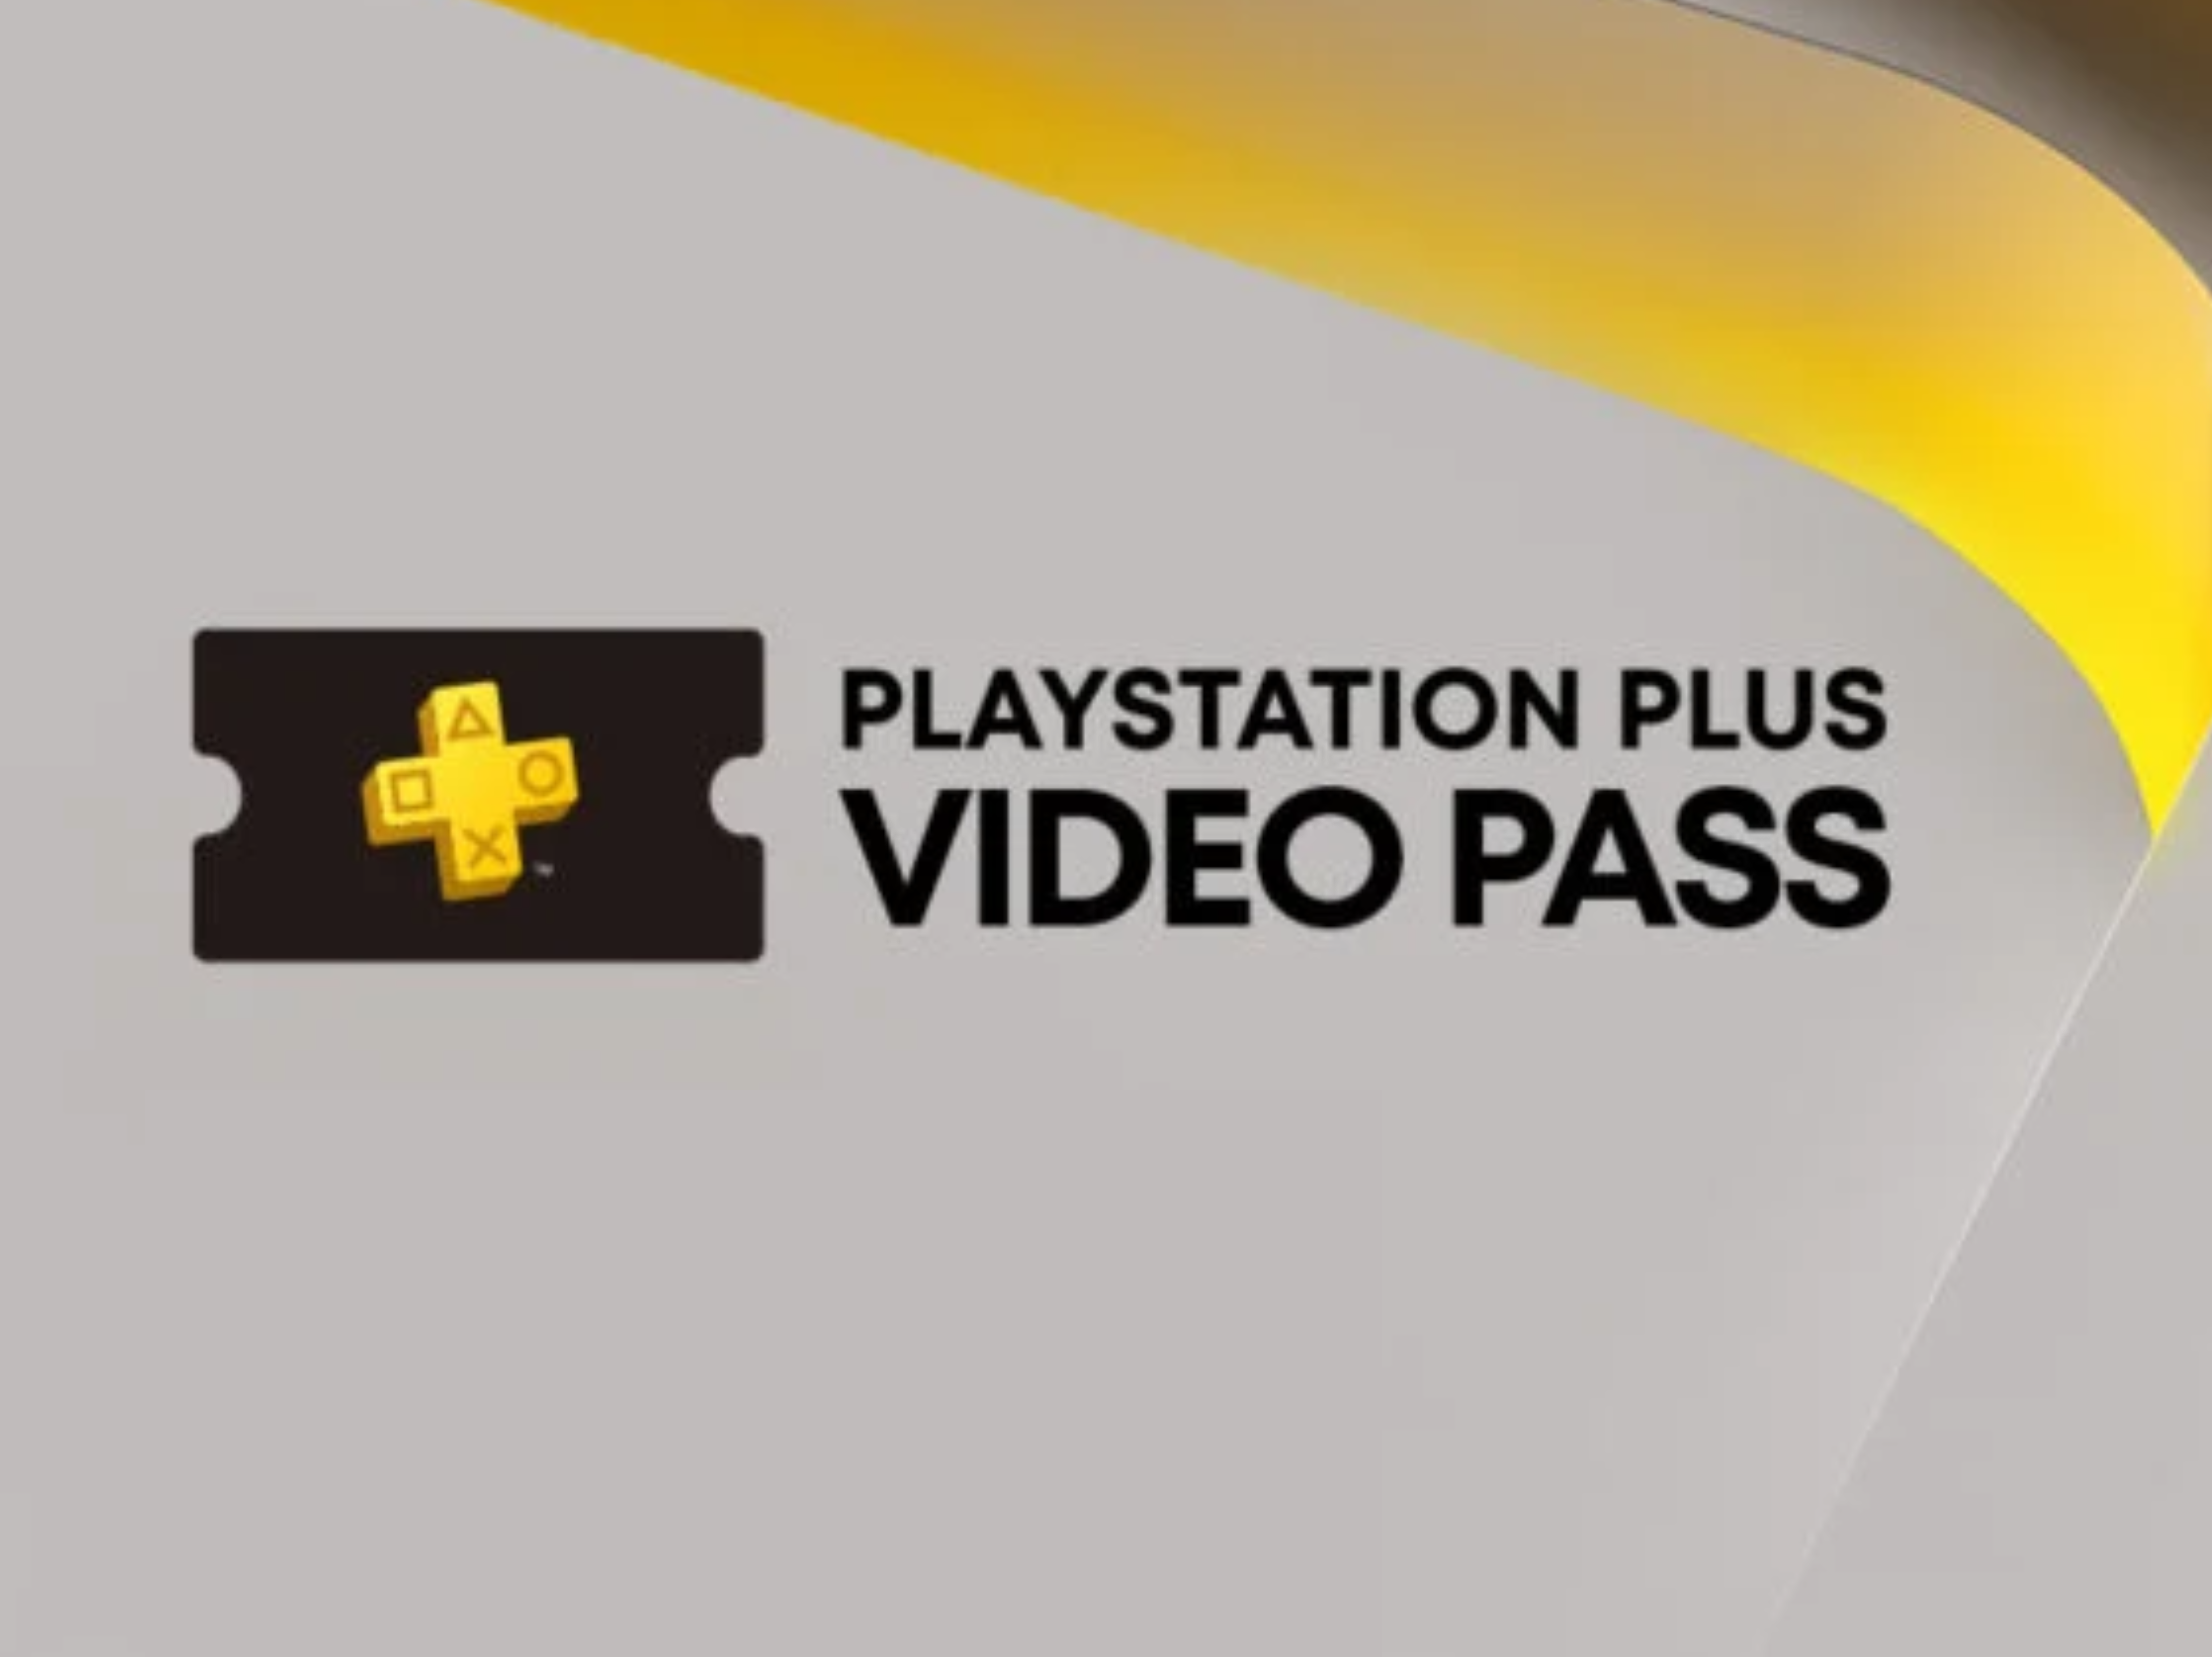 Sony is testing a PlayStation Plus perk called Video Pass in Poland, may launch in 2022